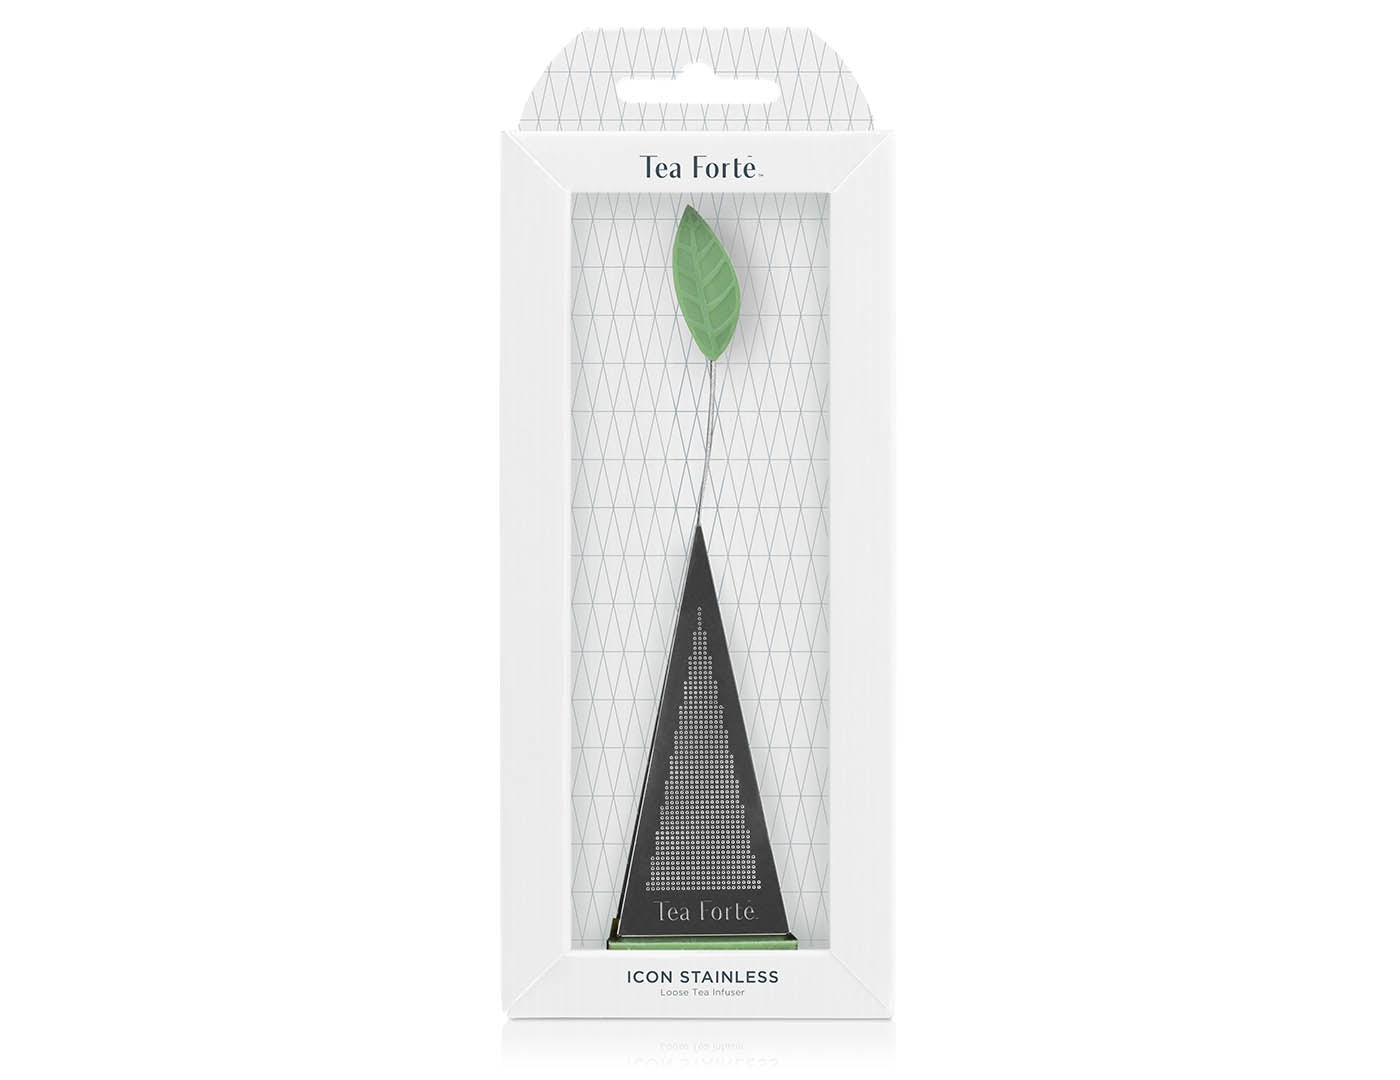 Icon stainless loose tea infuser showing packaging